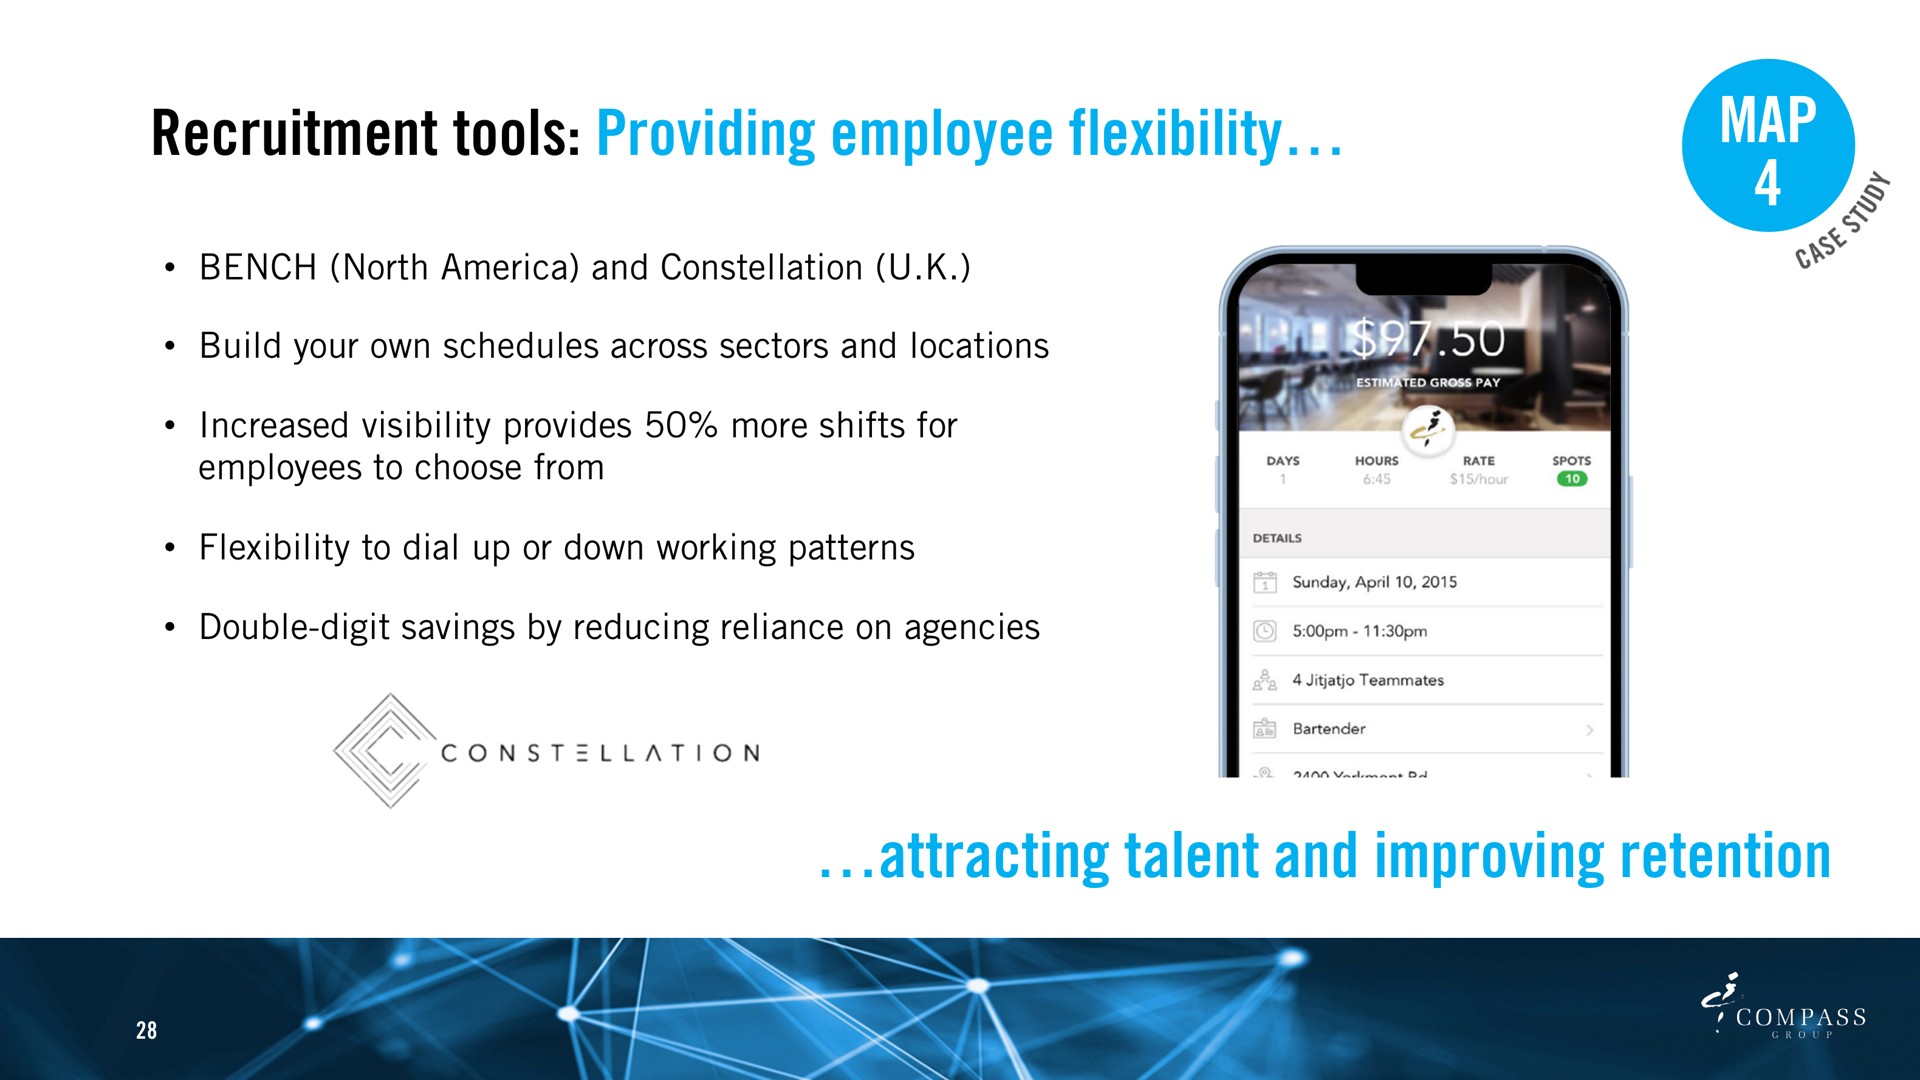 recruitment tools providing employee flexibility map attracting talent and improving retention | Compass Group